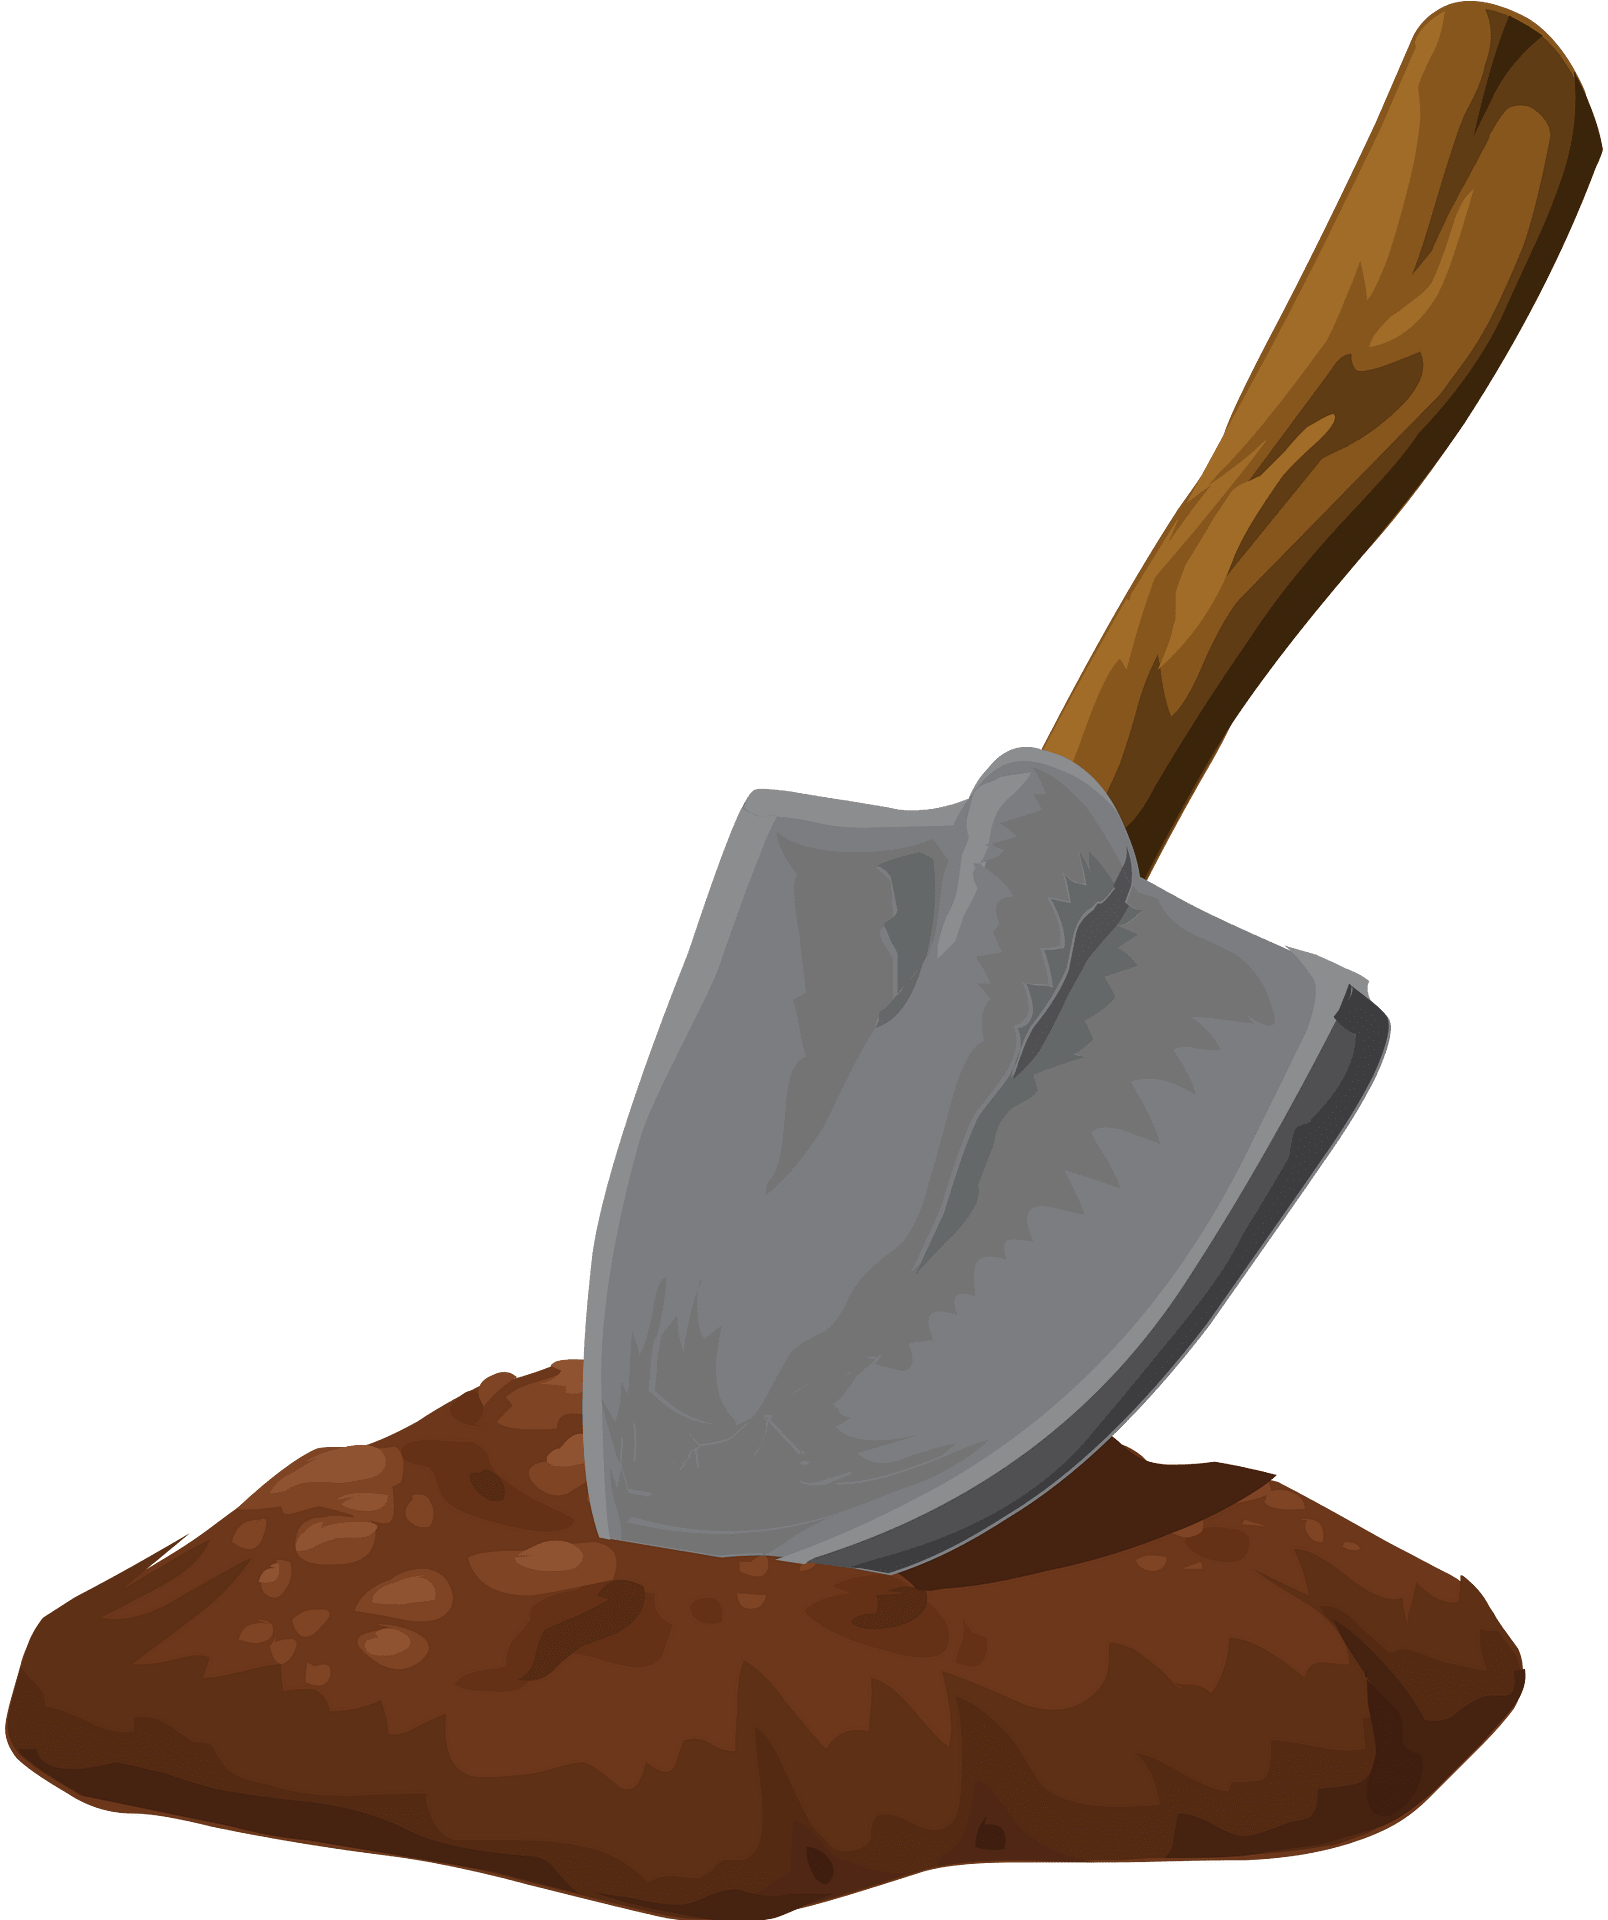 Shovel In The Ground. Gardening Tool On Checked Background - Clip Art ...